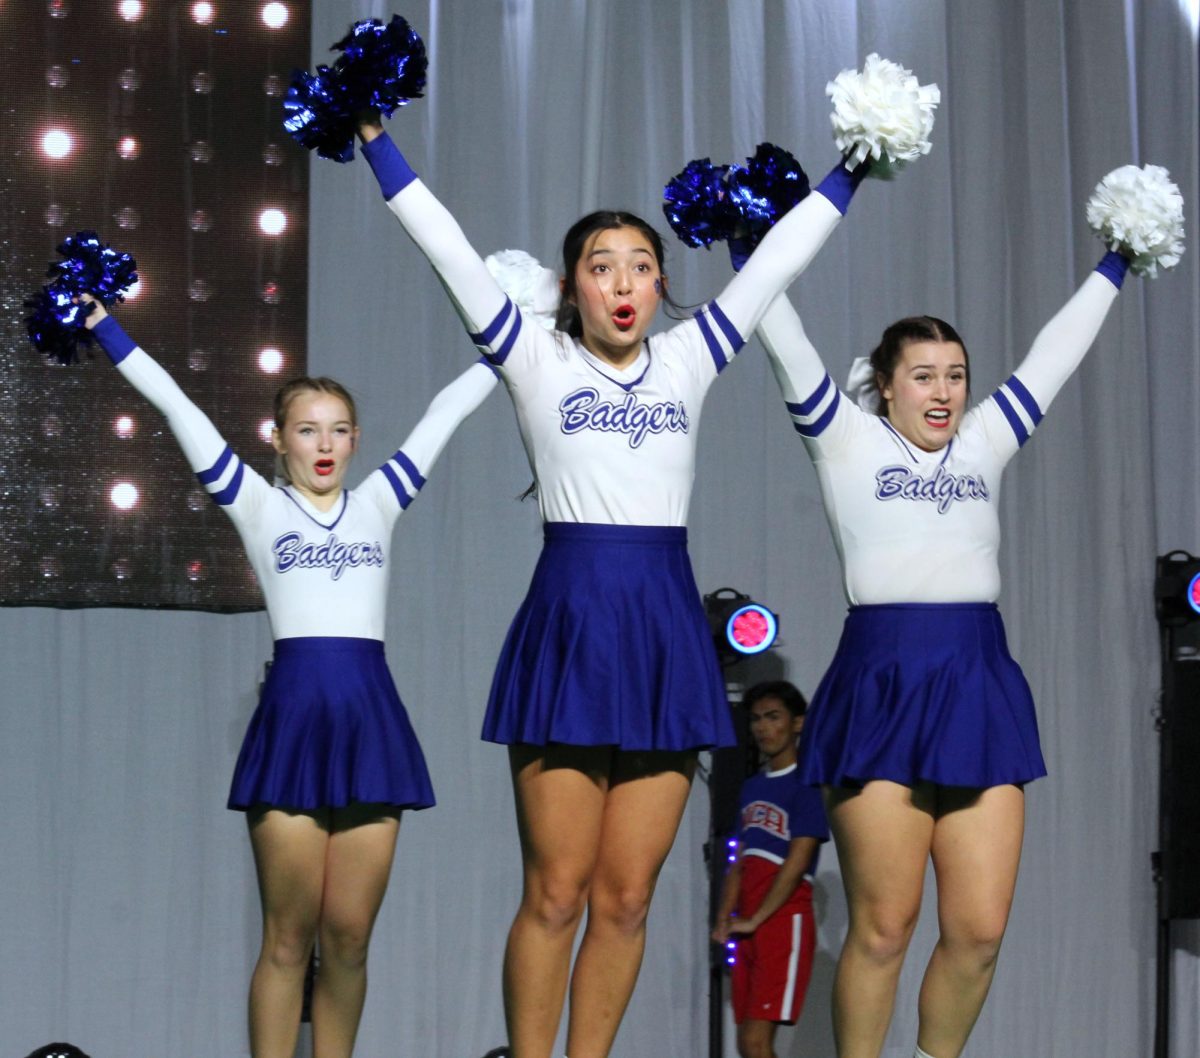 Freshman+Tayler+Sheard%2C+sophomore+Toby+Brooks-Potter+and+sophomore+Chandler+Boultinghouse+compete+in+finals+at+the+National+Cheer+Association+High+School+Nationals+Jan.+21.+